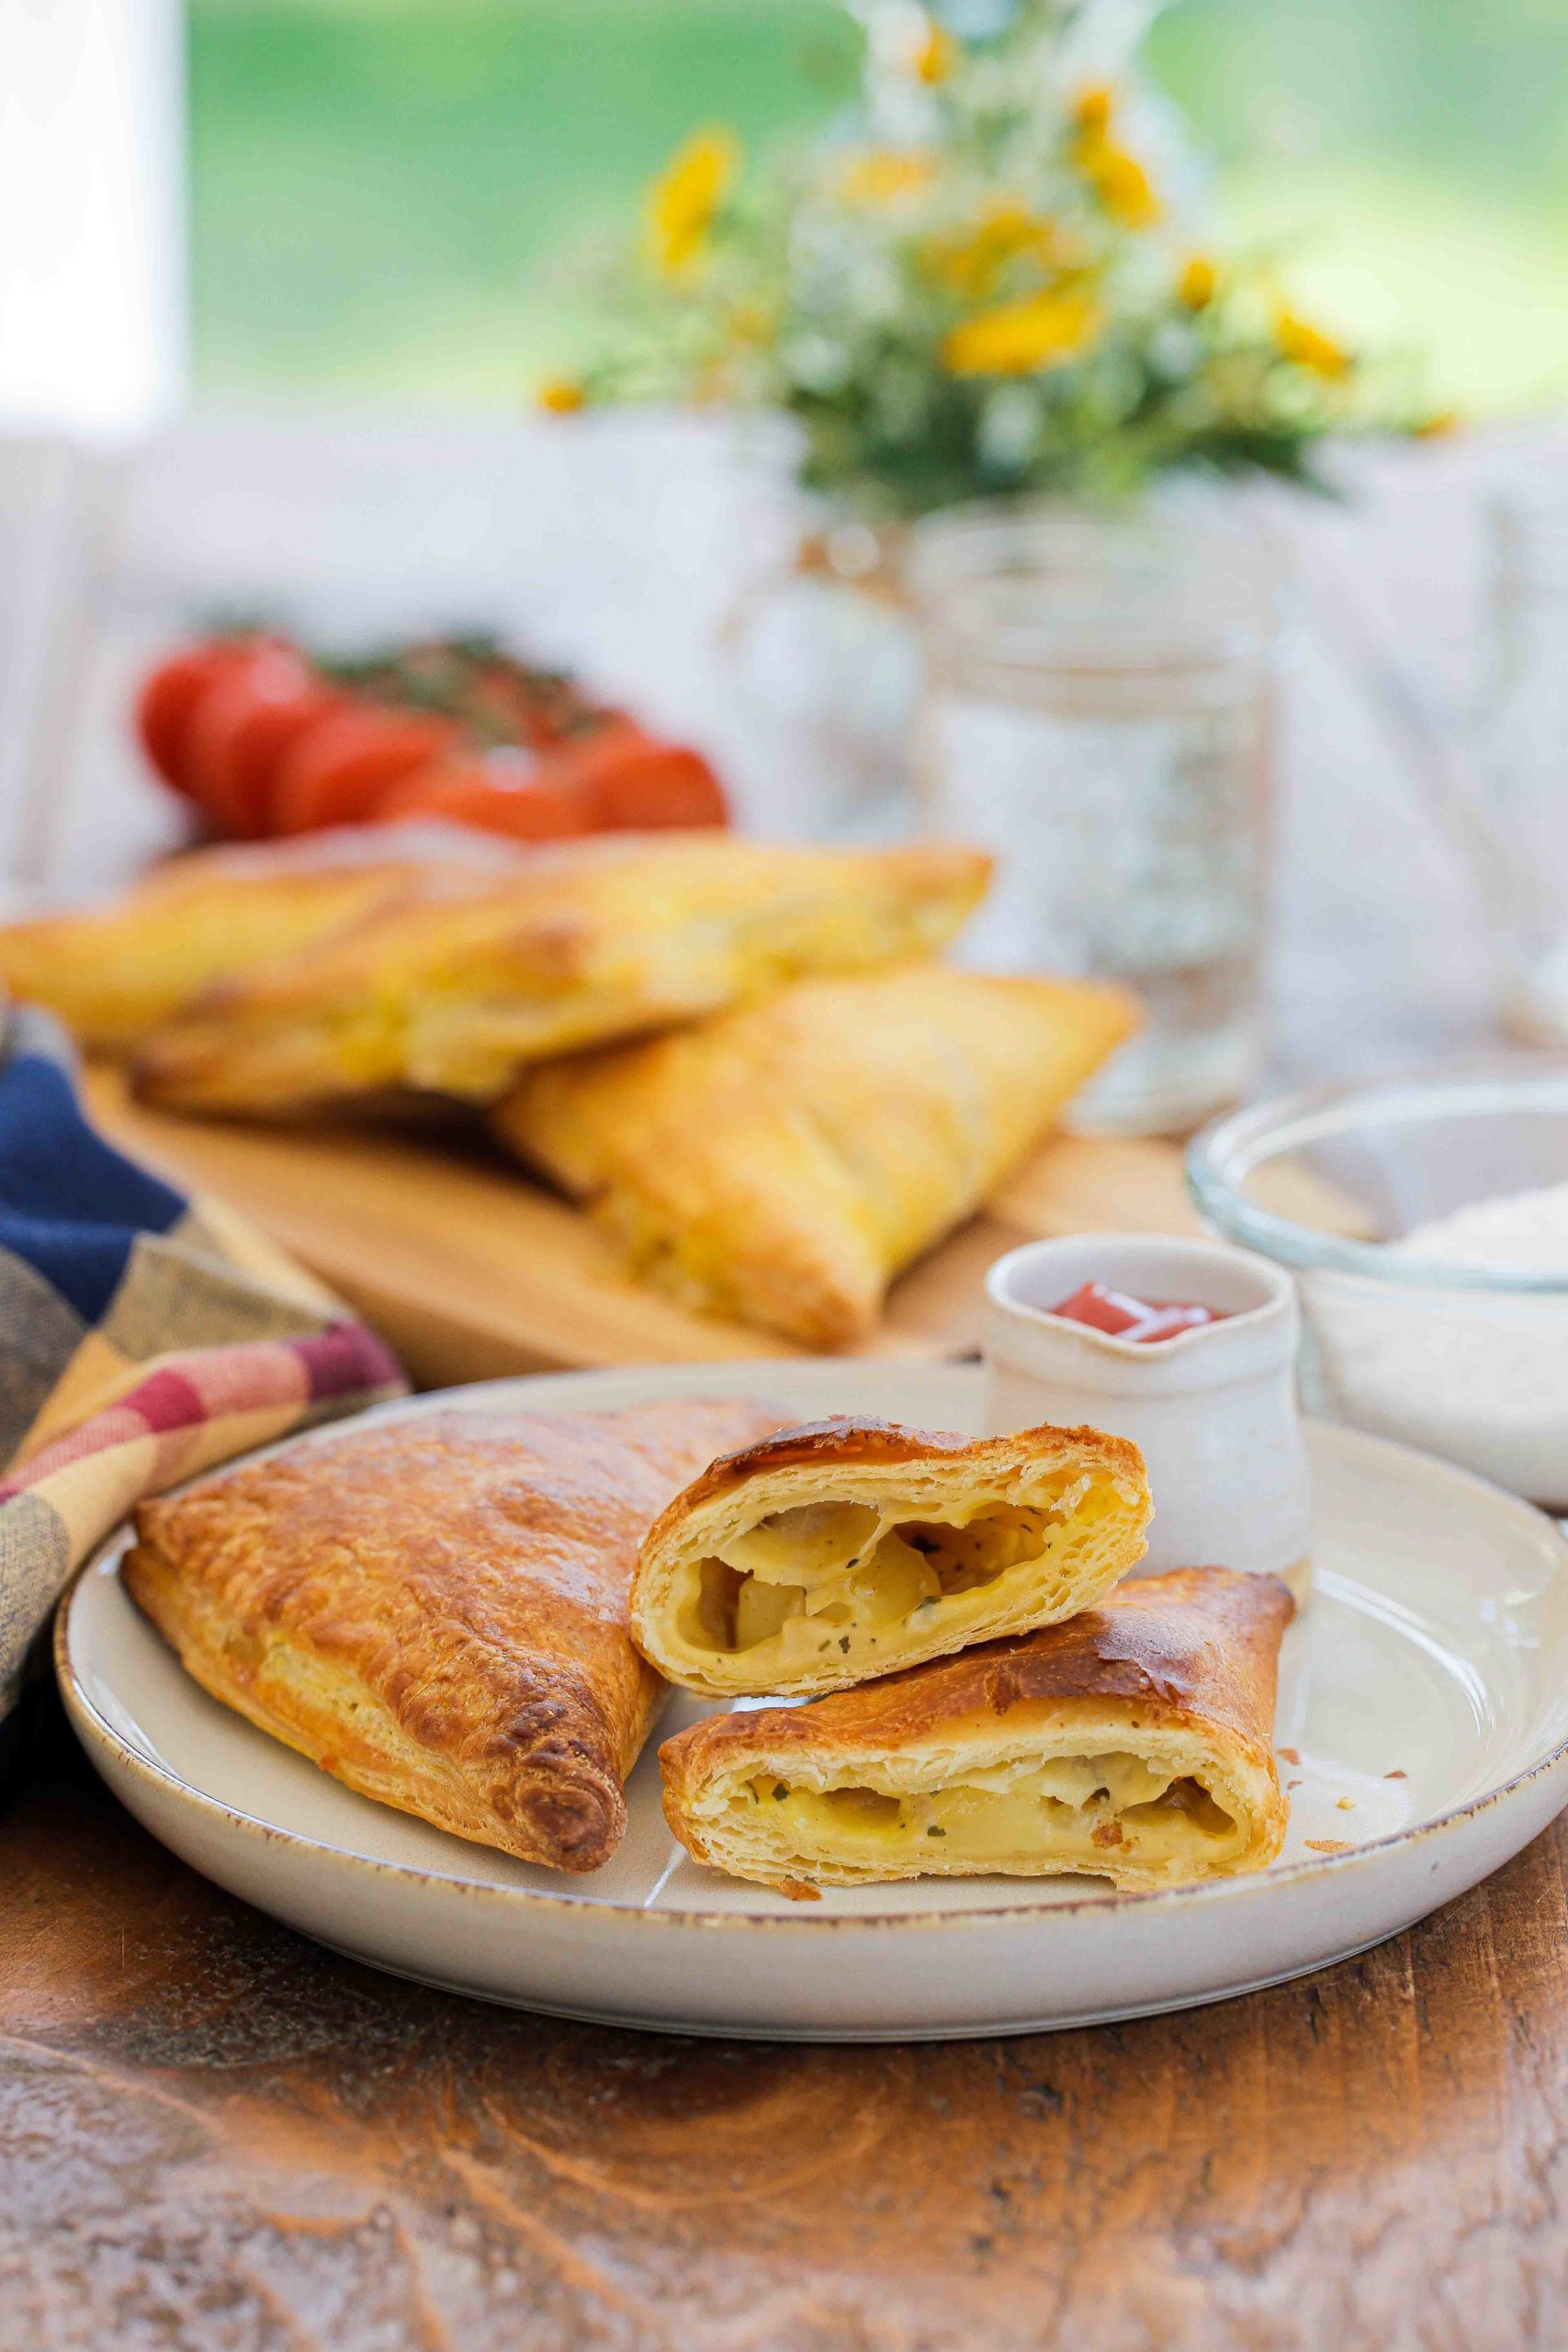 These delicious little cheese and potato pies make a handy midweek meal but are also perfect for lunchboxes and picnics. Serve hot or cold and freeze any extras for a quick meal another day! Recipe on thecookandhim.com | #cheeseandpotatopie #puffpastry #pasties #vegan #vegancheese #vegetarian